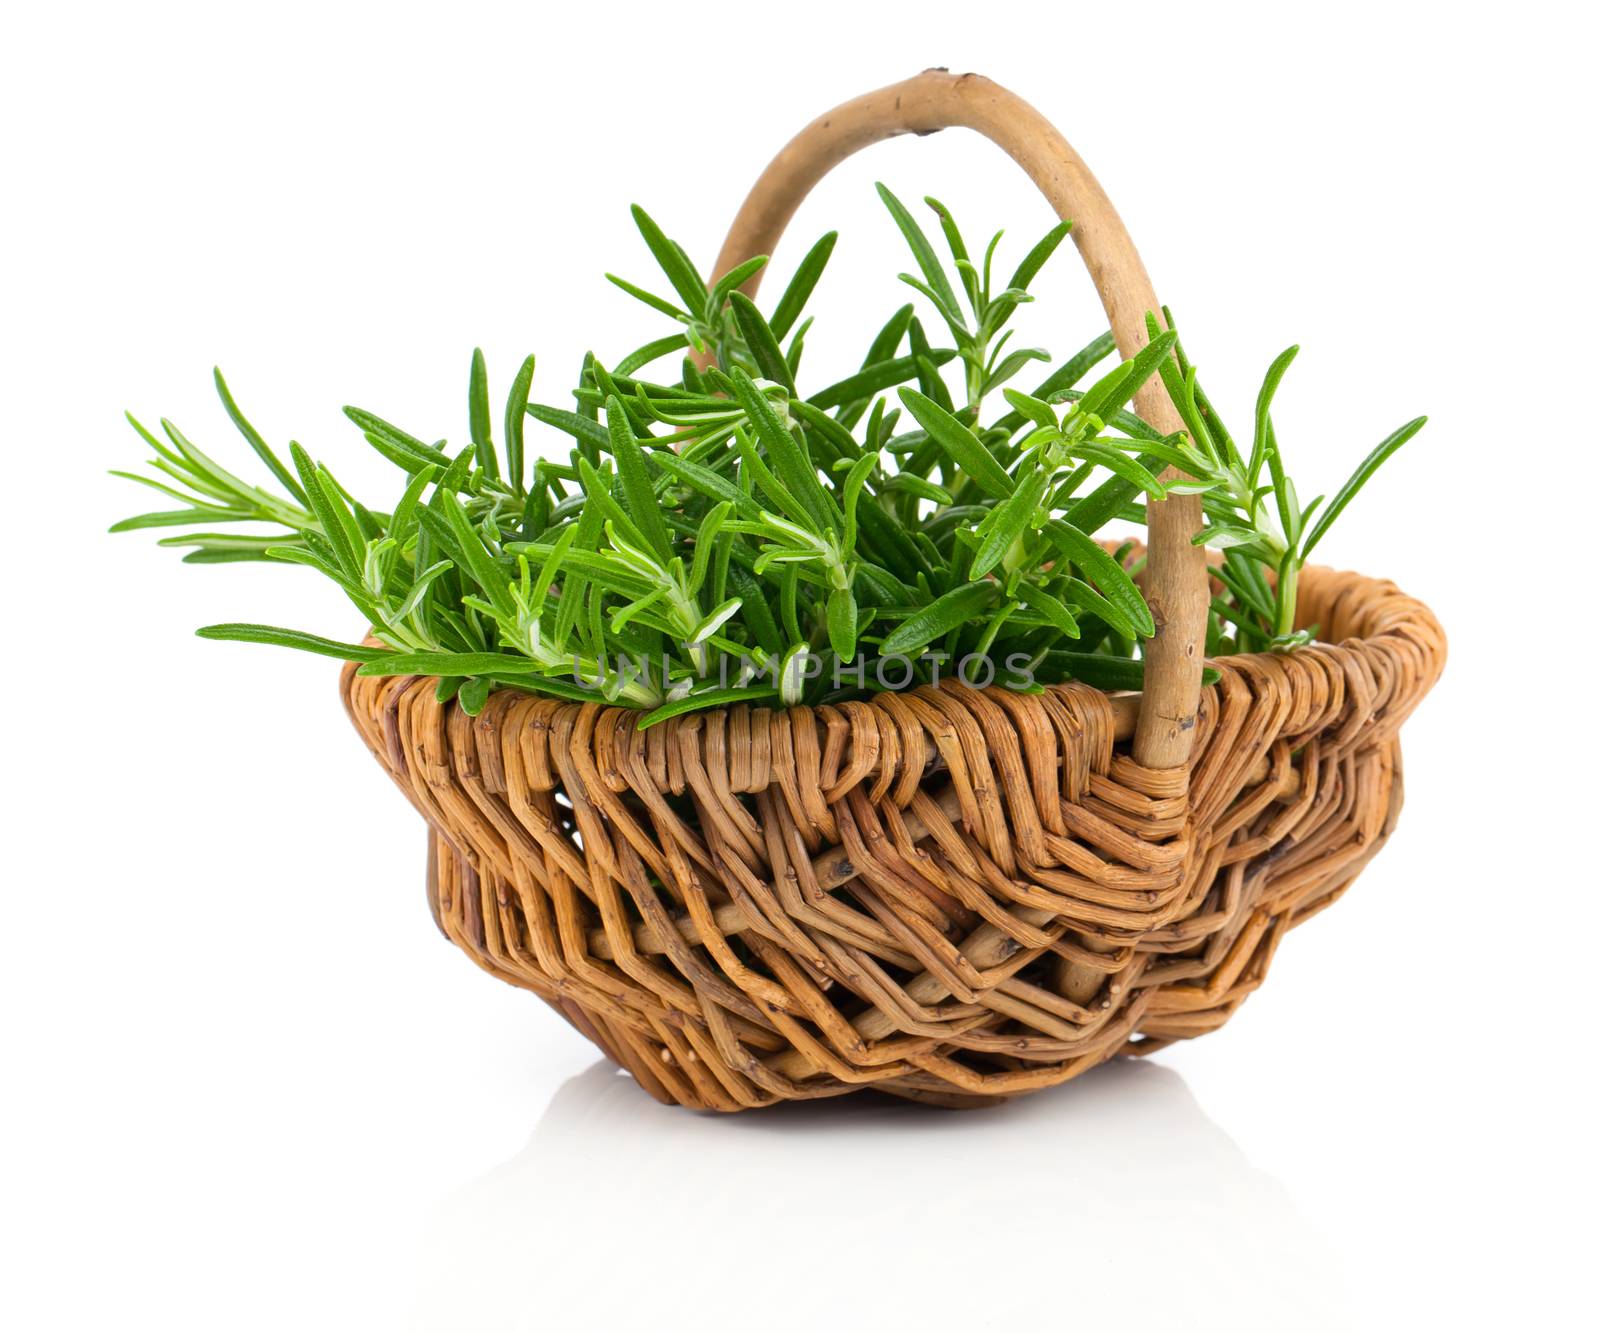 Bundle of fresh rosemary in a wicker basket, on a white background